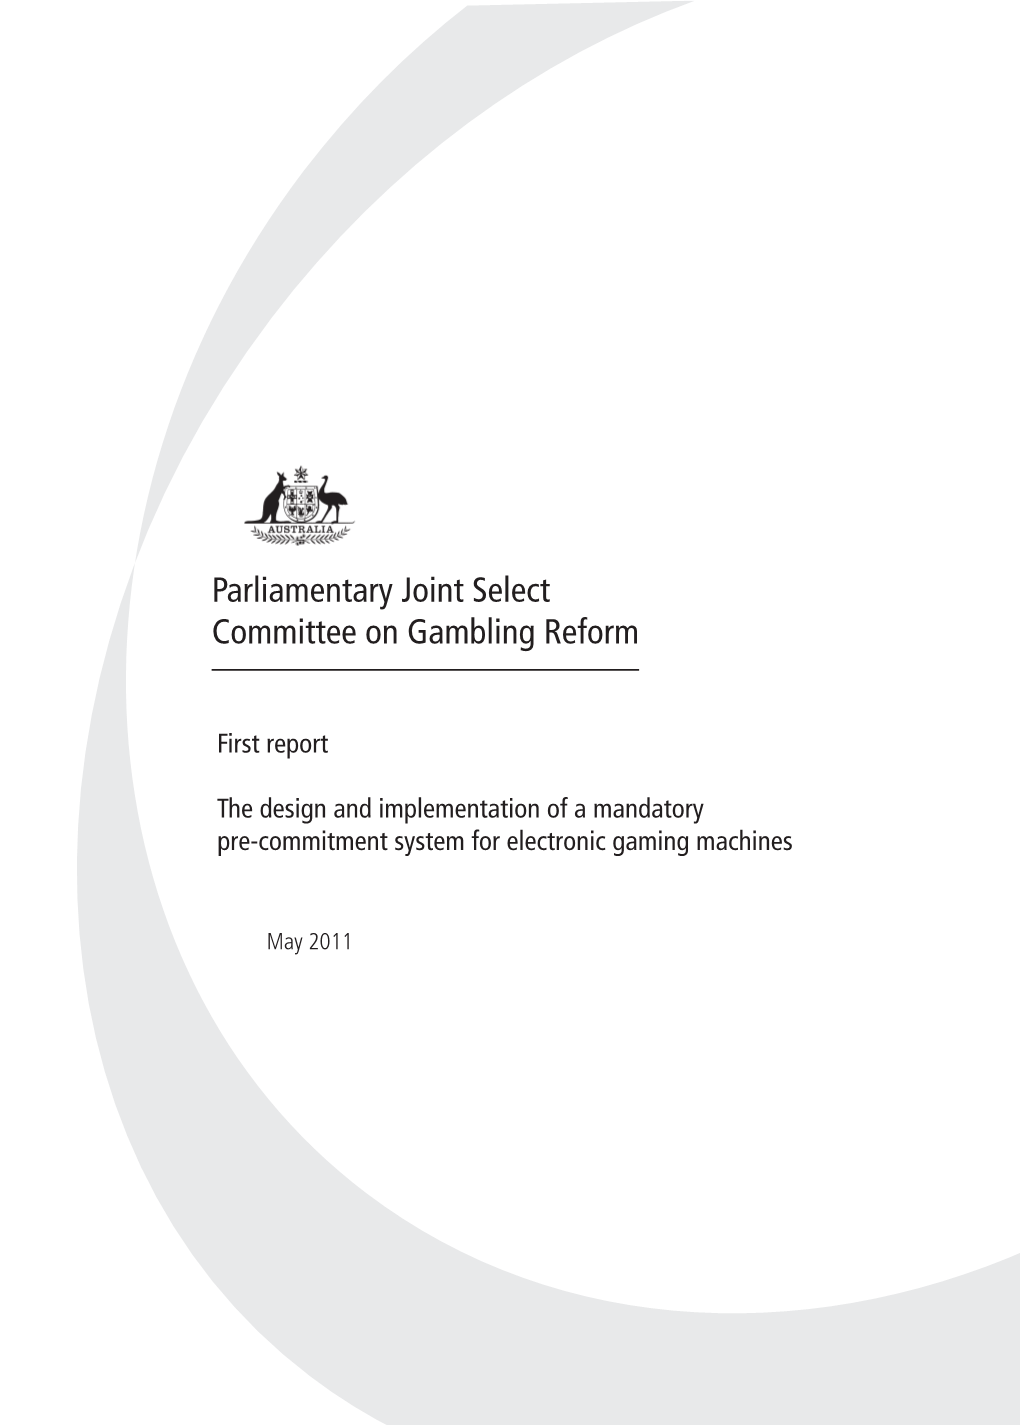 Parliamentary Joint Select Committee on Gambling Reform